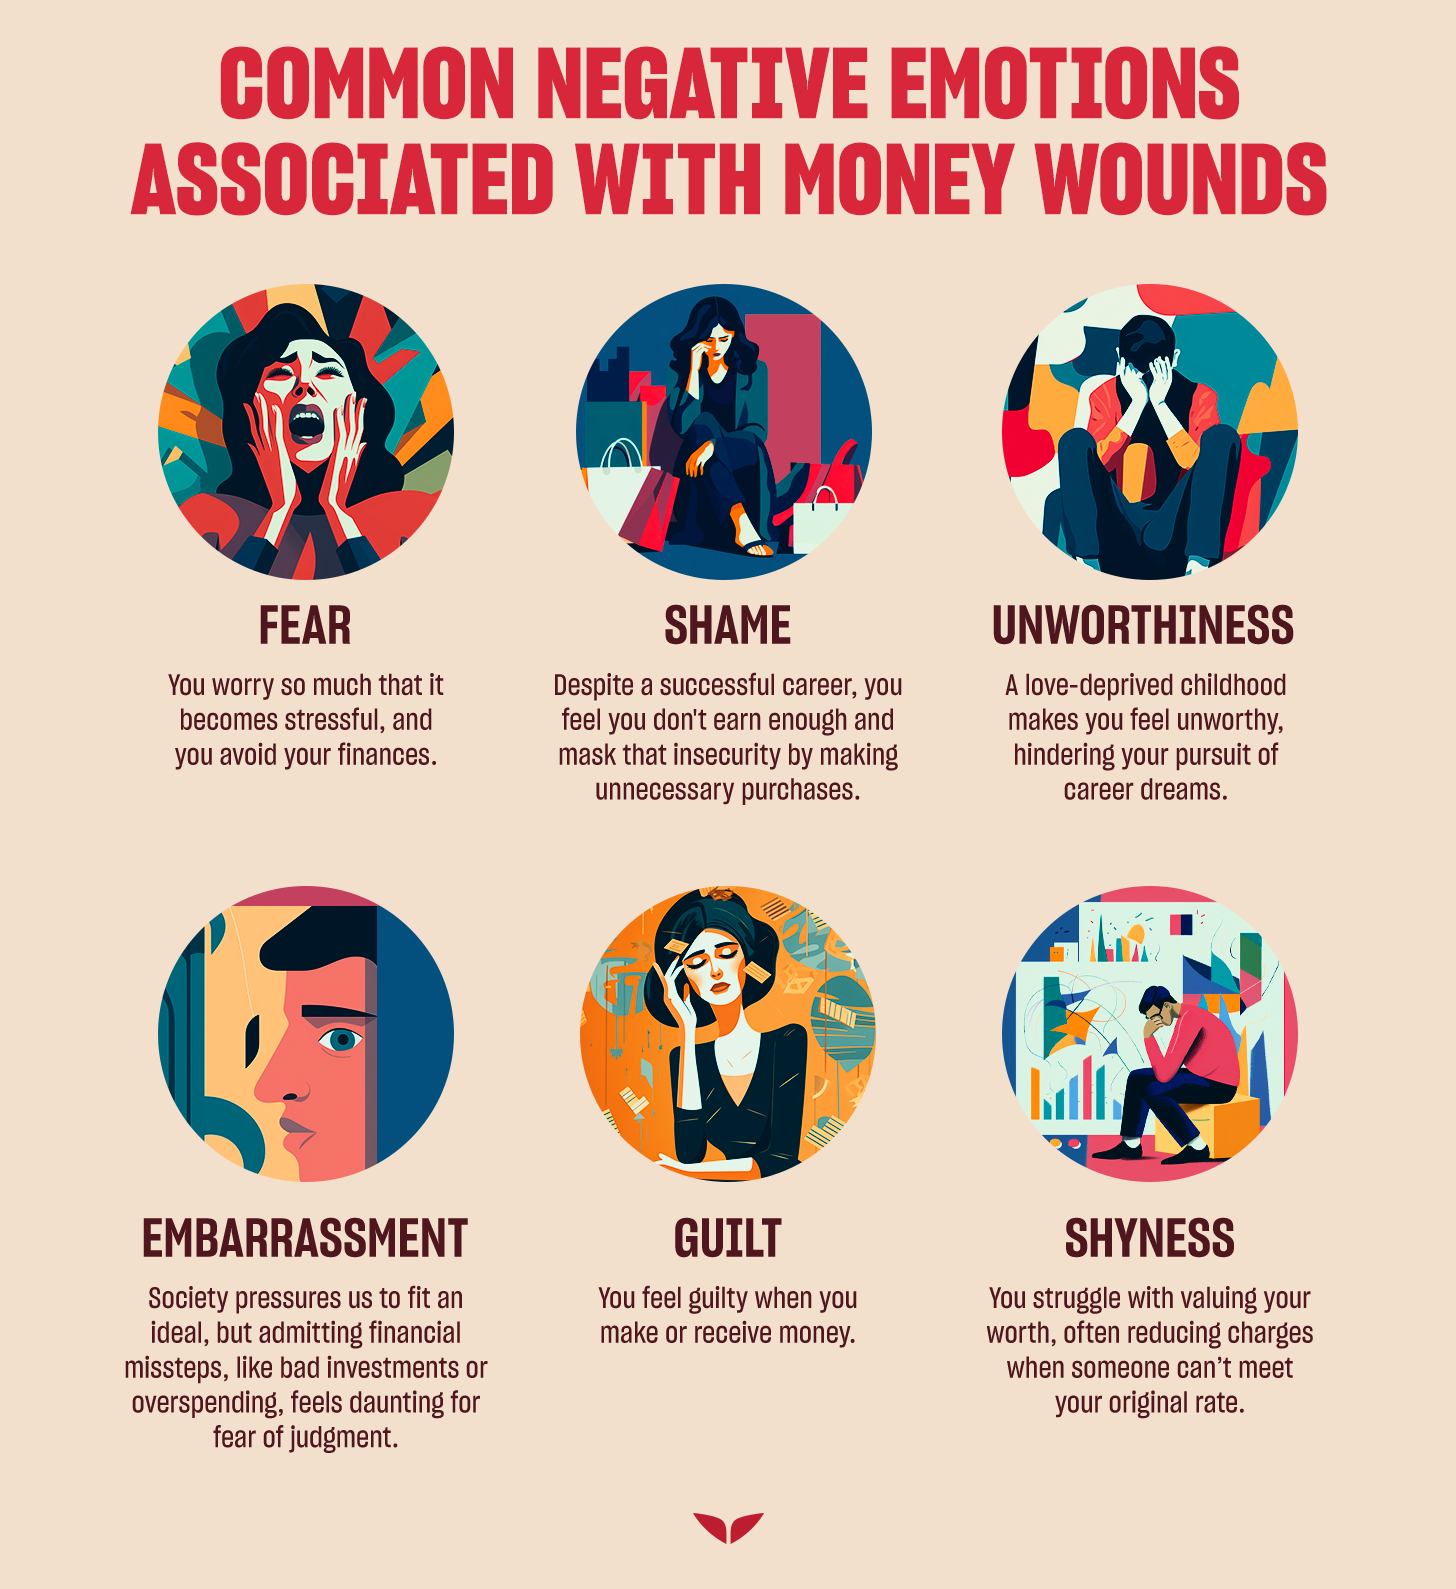 Common negative emotions associated with money wounds